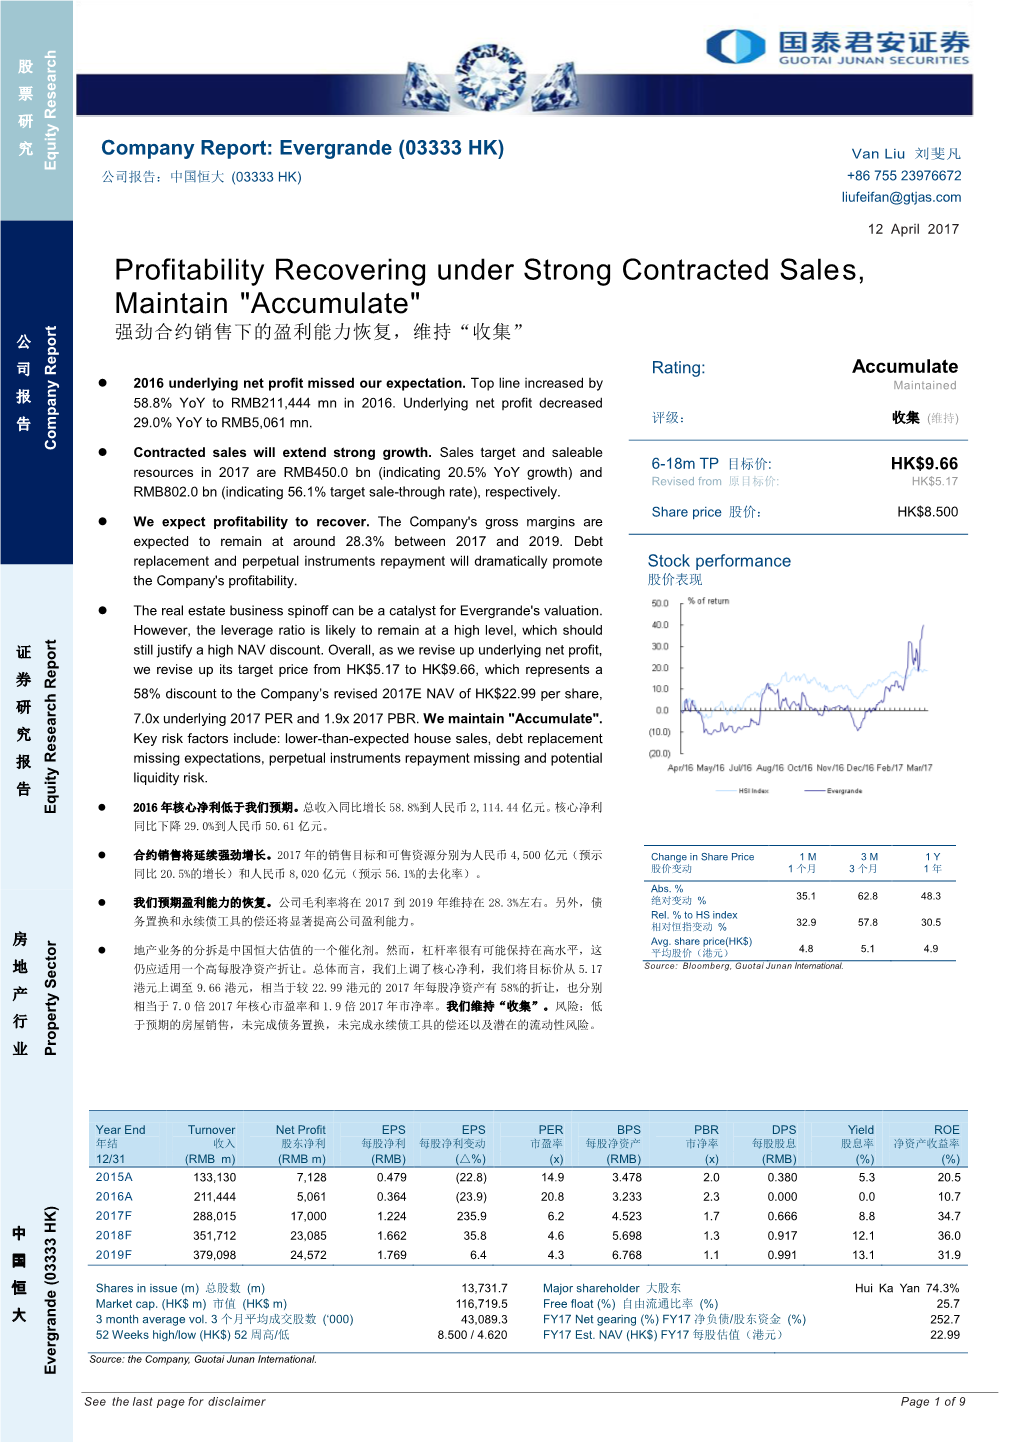 Profitability Recovering Under Strong Contracted Sales, Maintain "Accumulate"